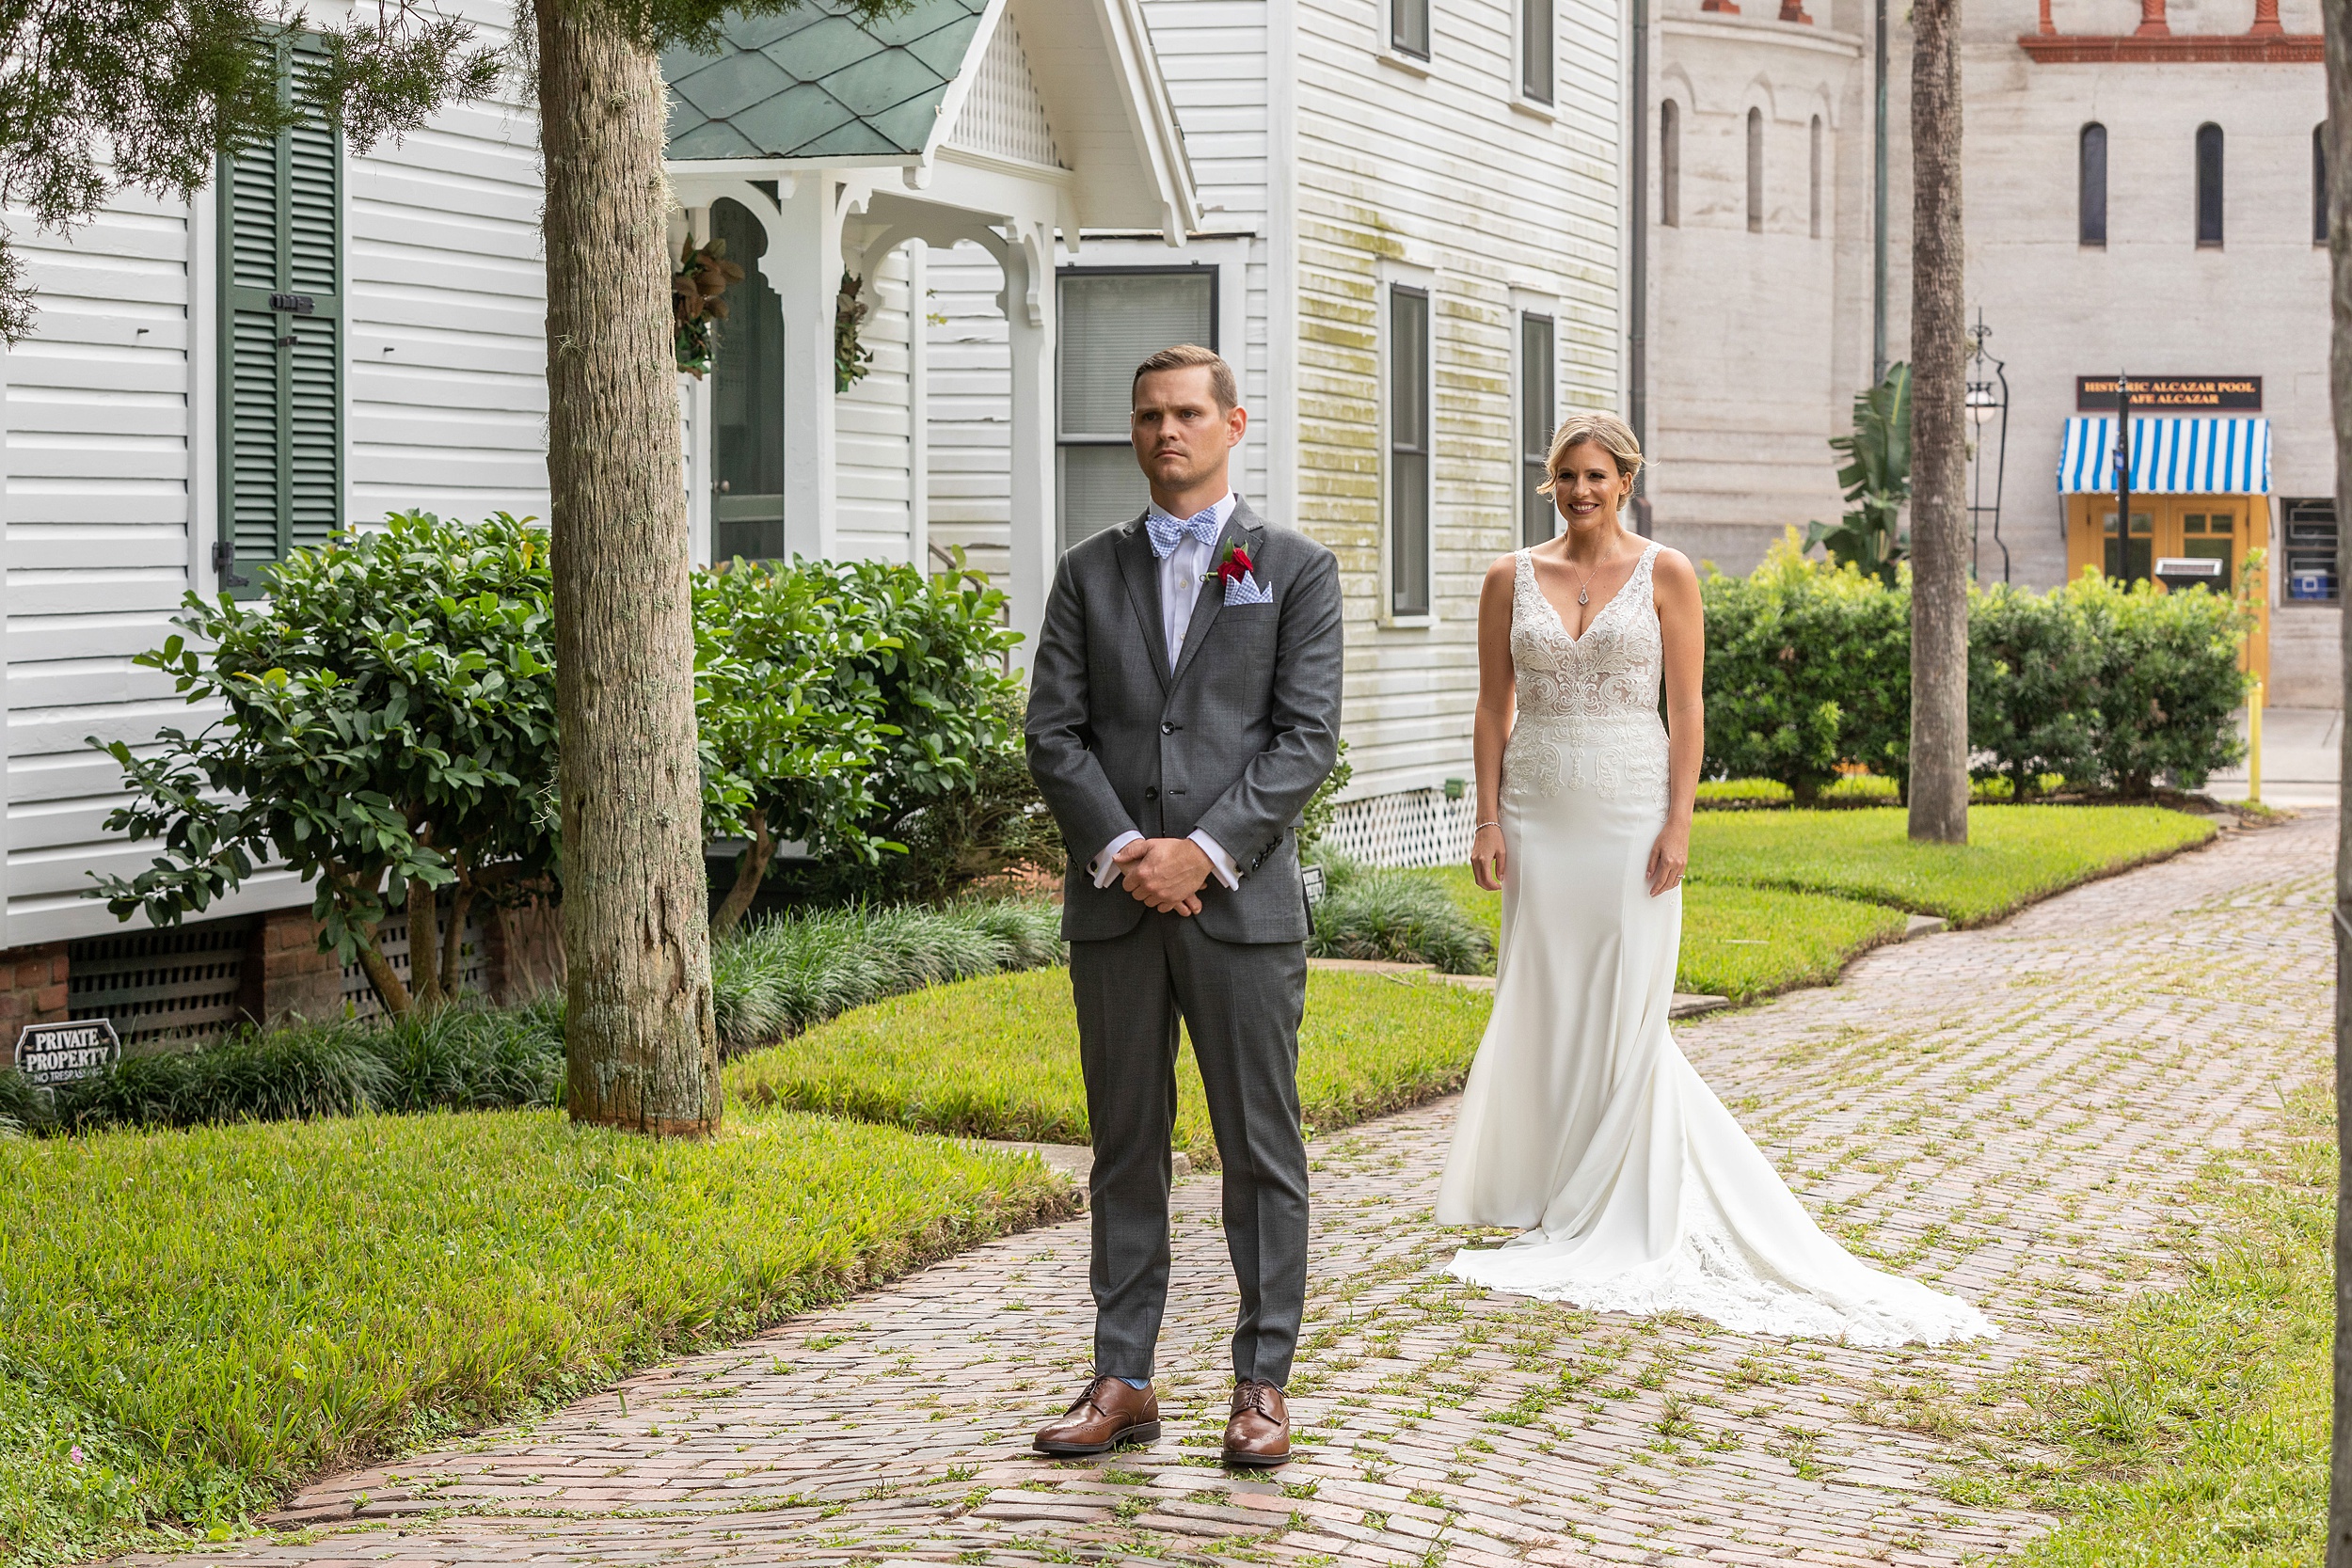 A groom waits for his bride to call him to see her for the first time in a first look on a historical brick sidewalk